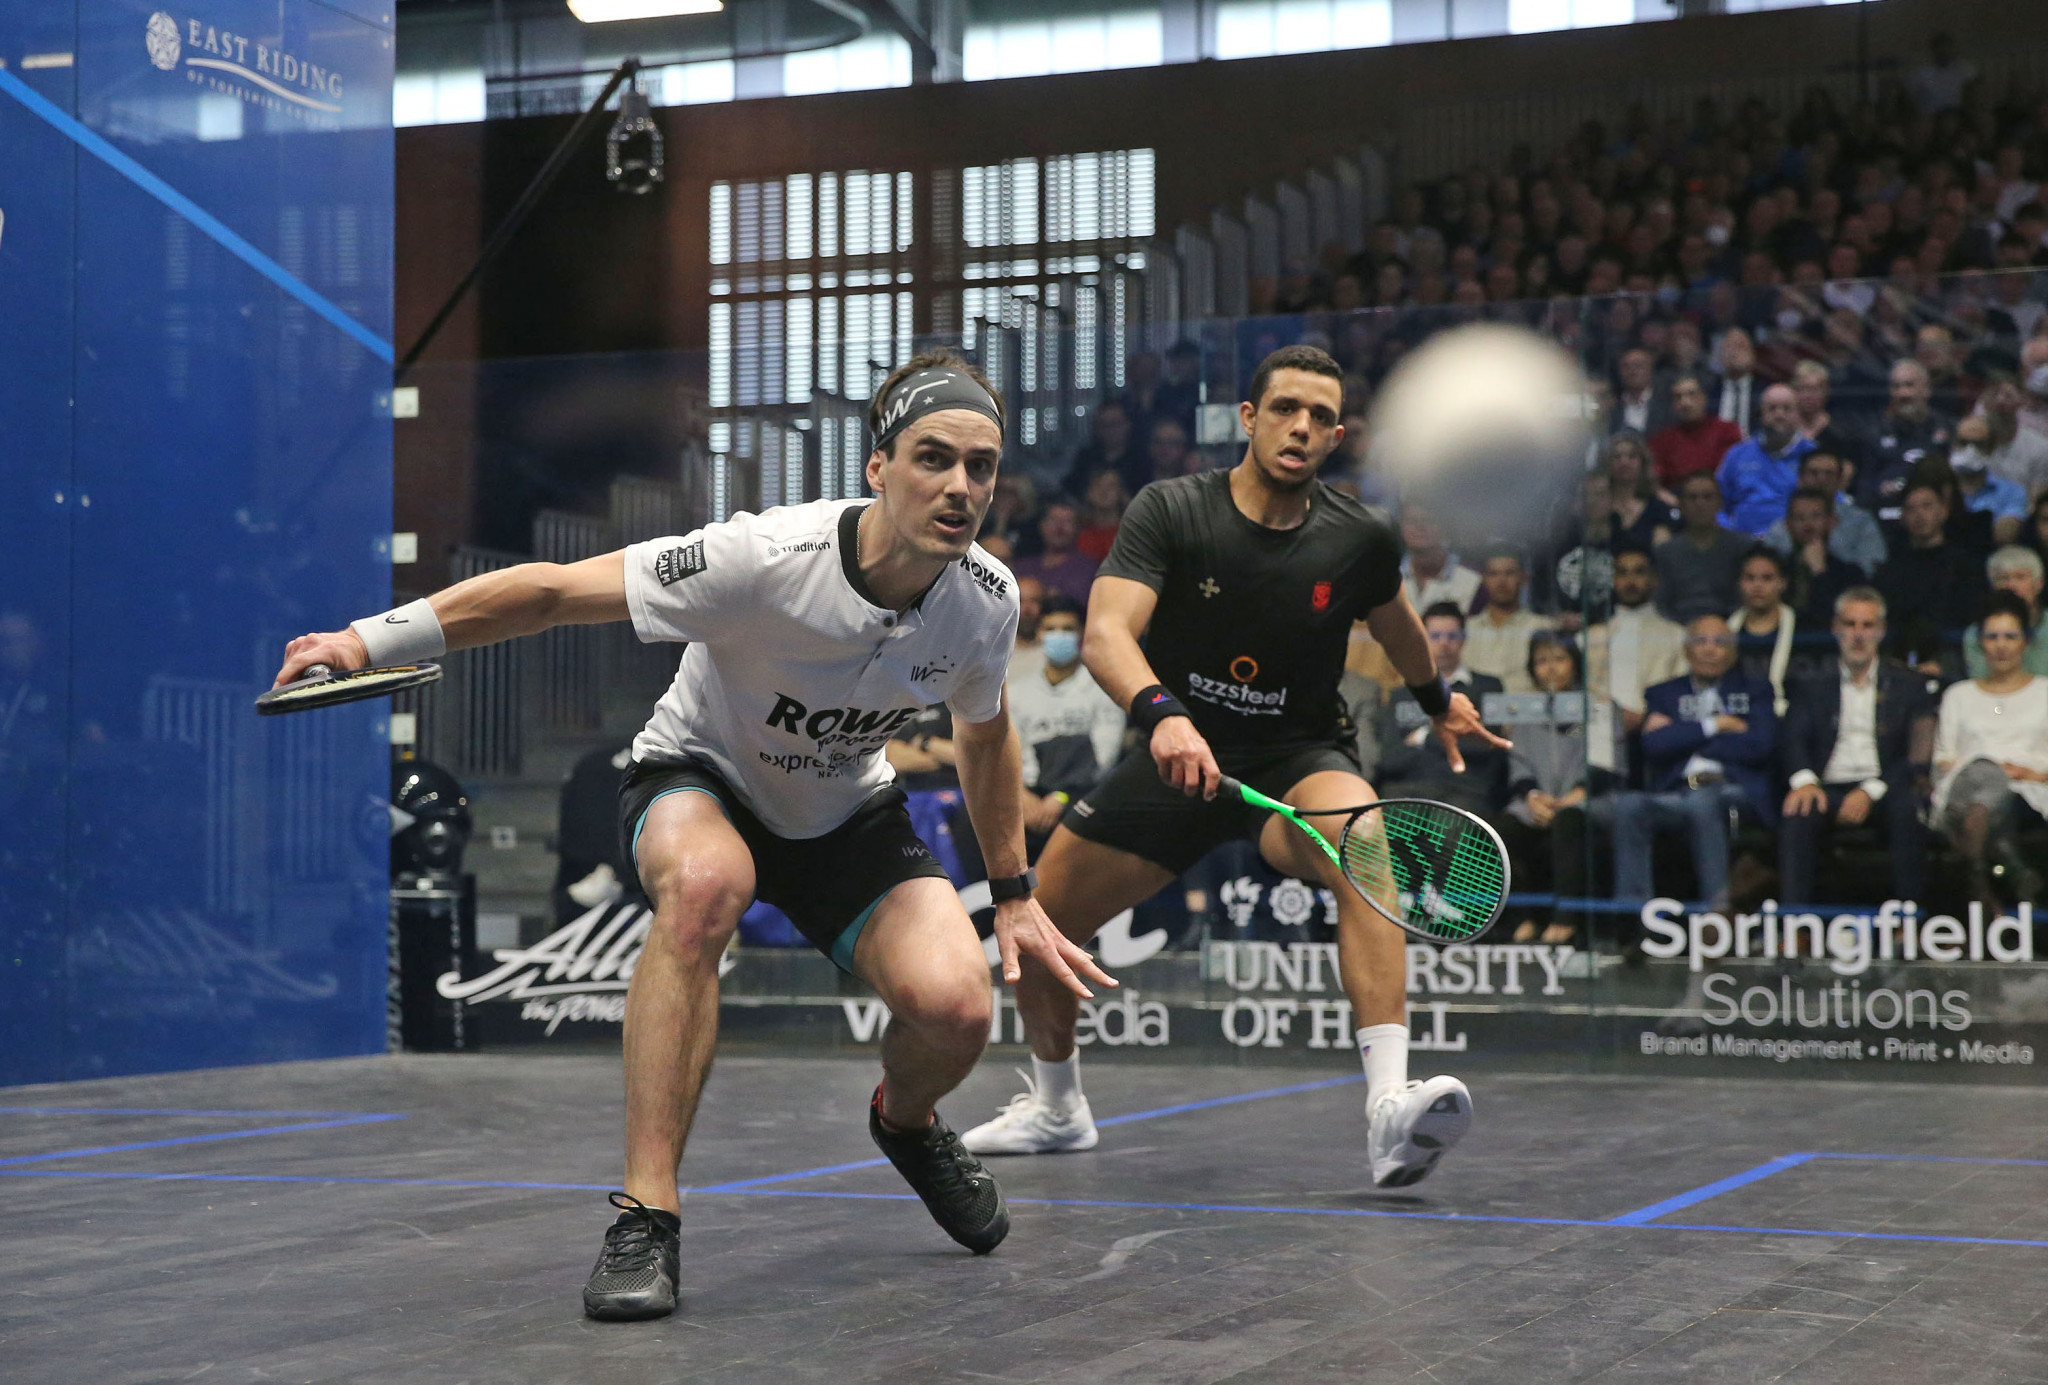 World number one spot up for grabs in men’s British Open squash final